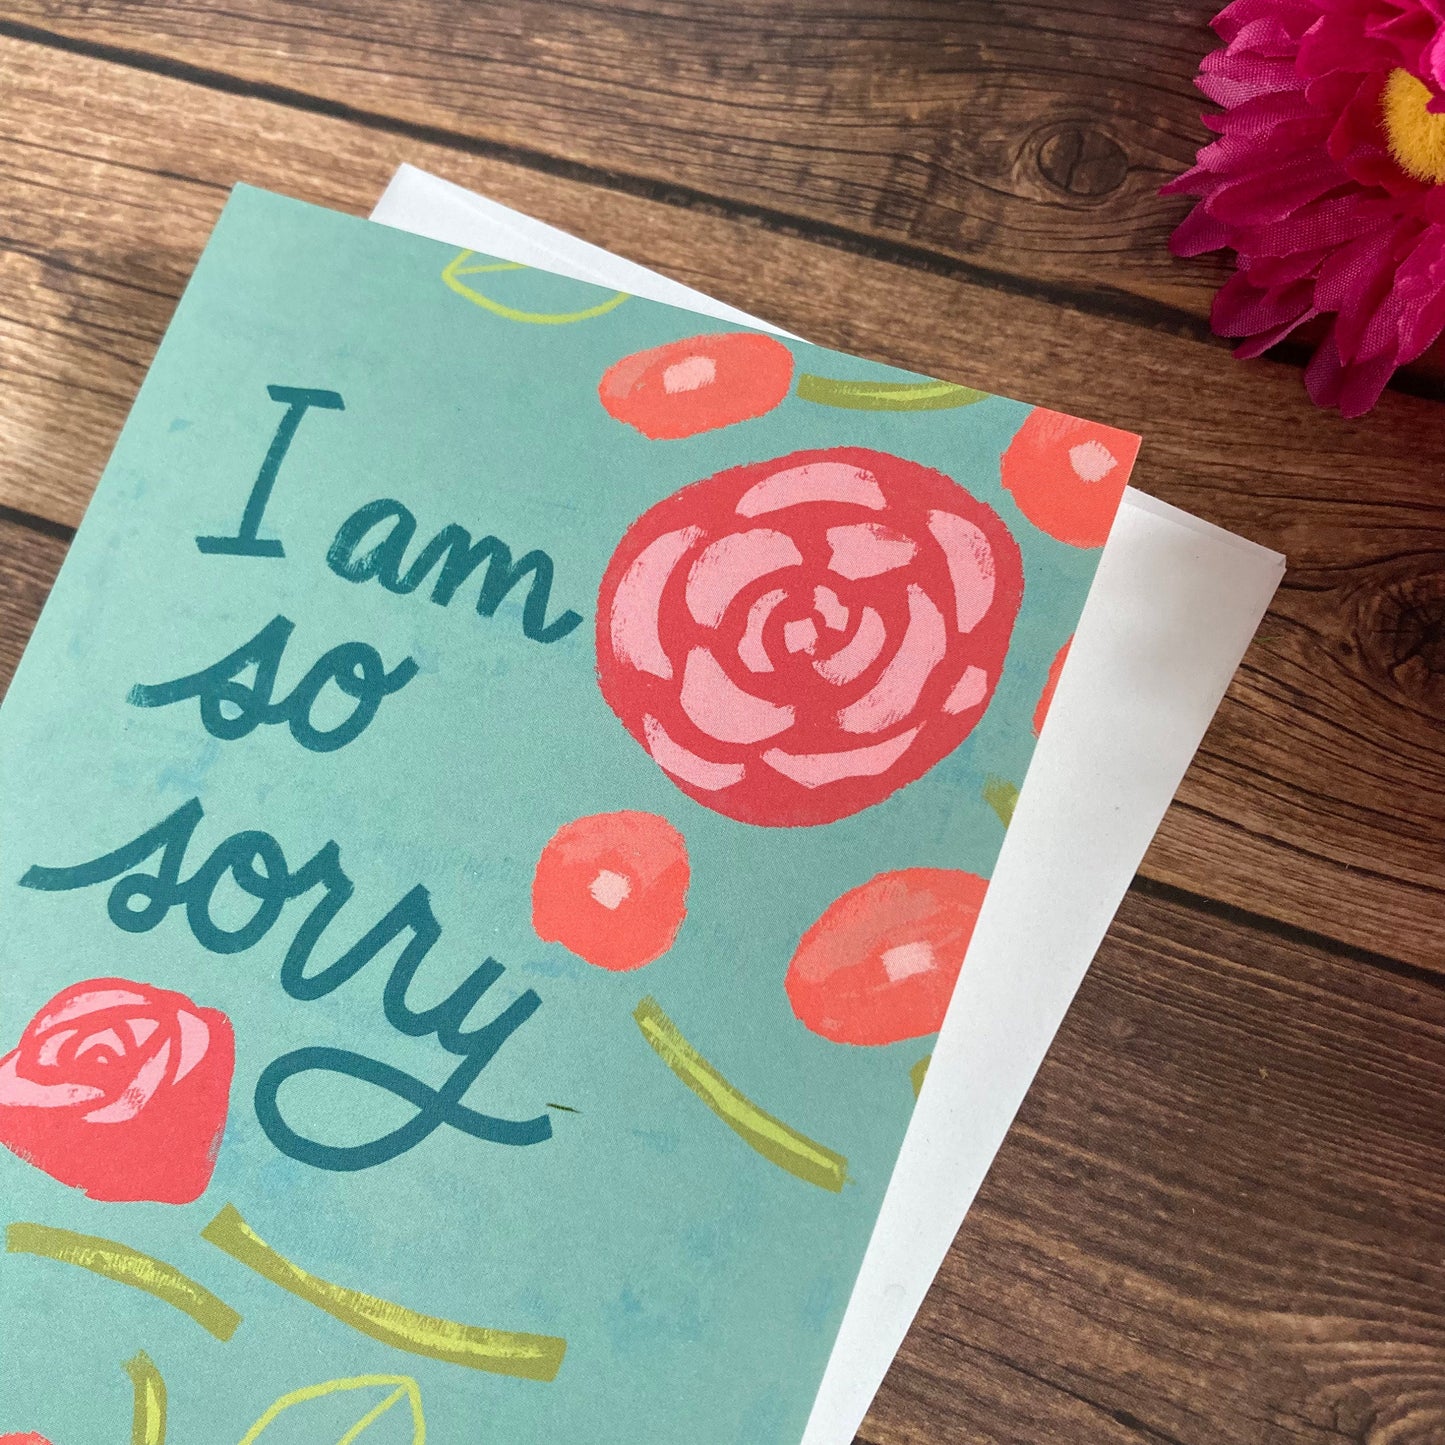 SYMPATHY - I Am So Sorry - condolence, apology, regret, grief, loss, mourning card, Eco-Friendly Notecards by Adriana Bergstrom (Adriprints)